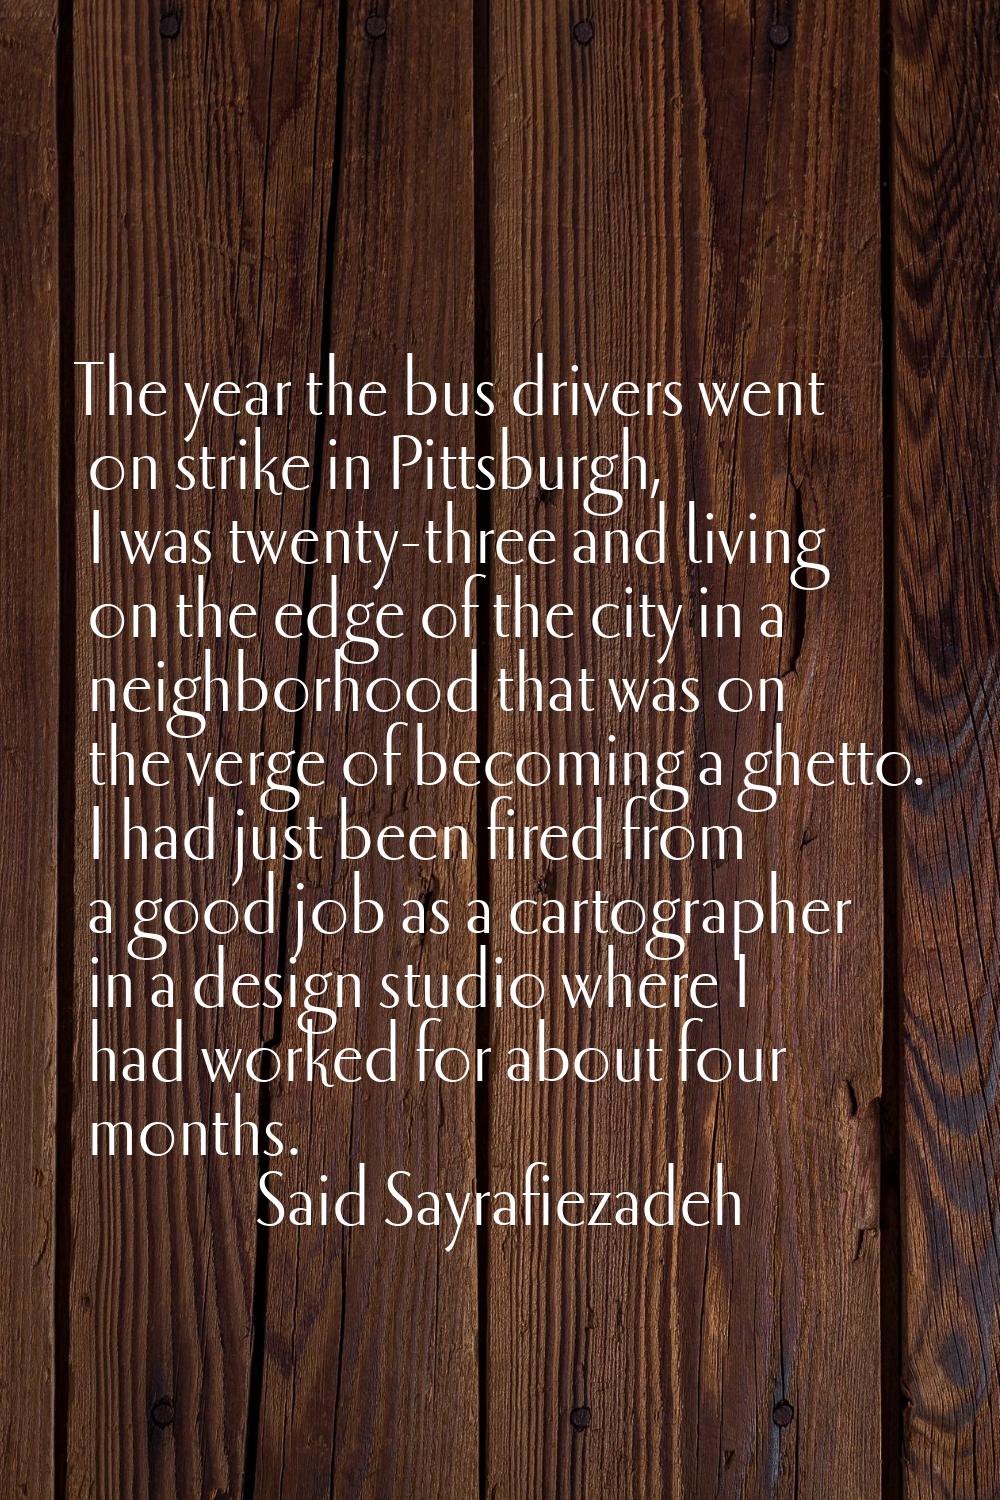 The year the bus drivers went on strike in Pittsburgh, I was twenty-three and living on the edge of